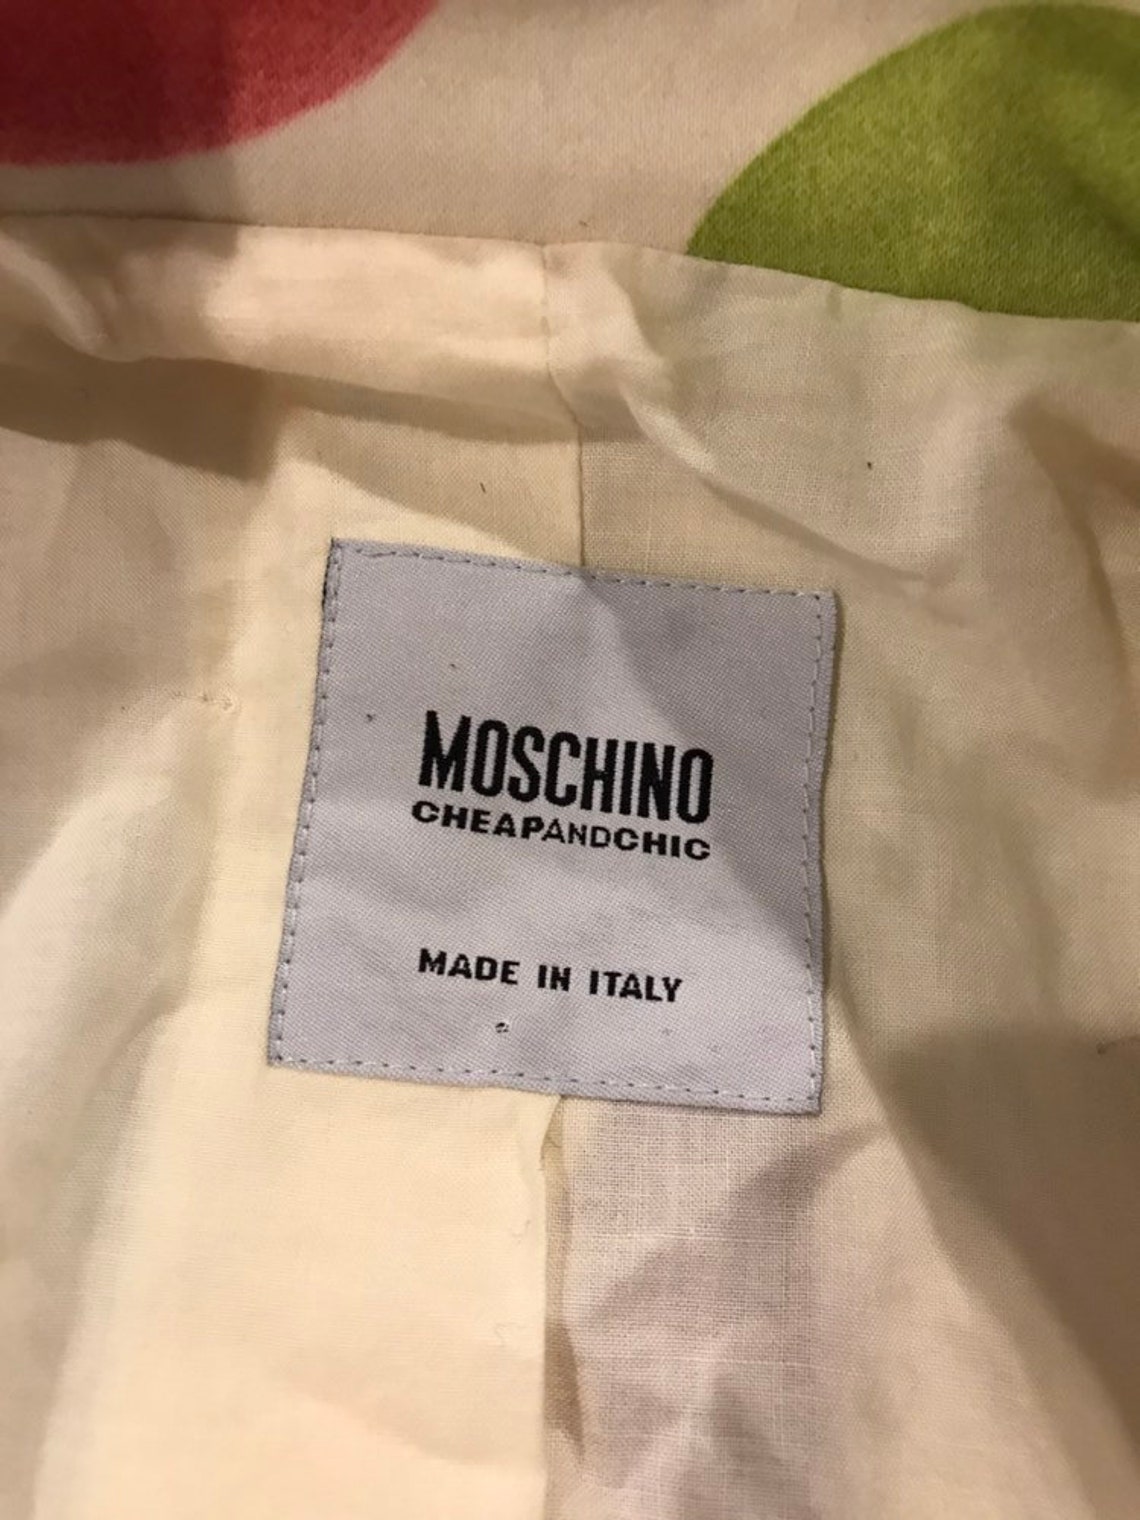 Vintage MOSCHINO Cheap and Chic Trench Coat Jacket Size | Etsy